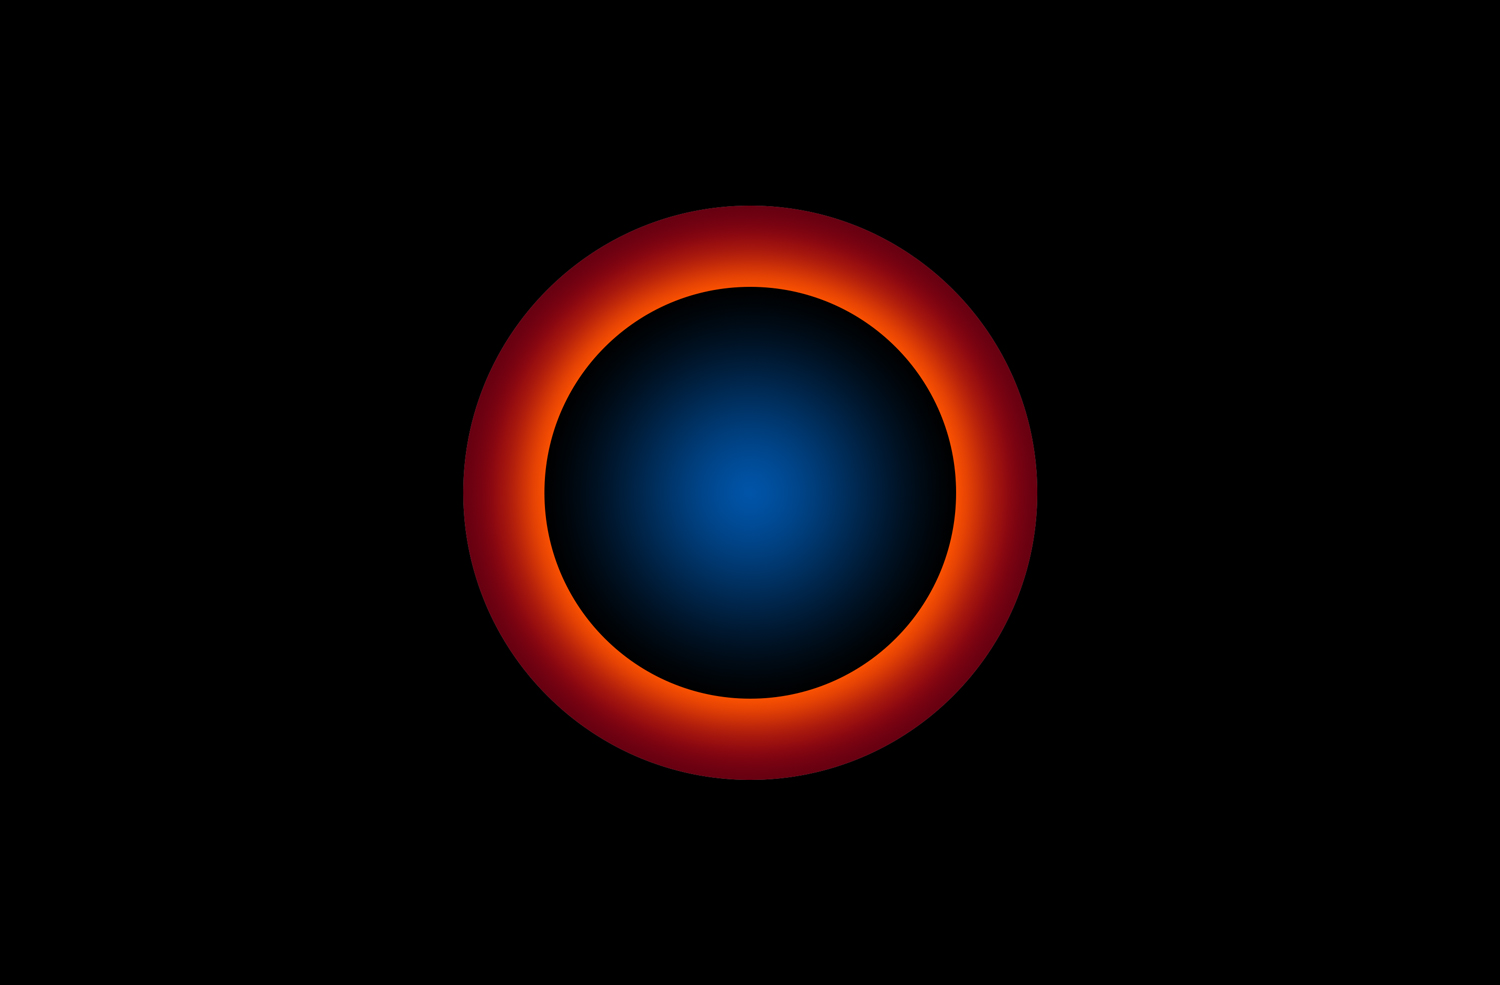 Custom orange-to-red gradient in outer ring in Photoshop